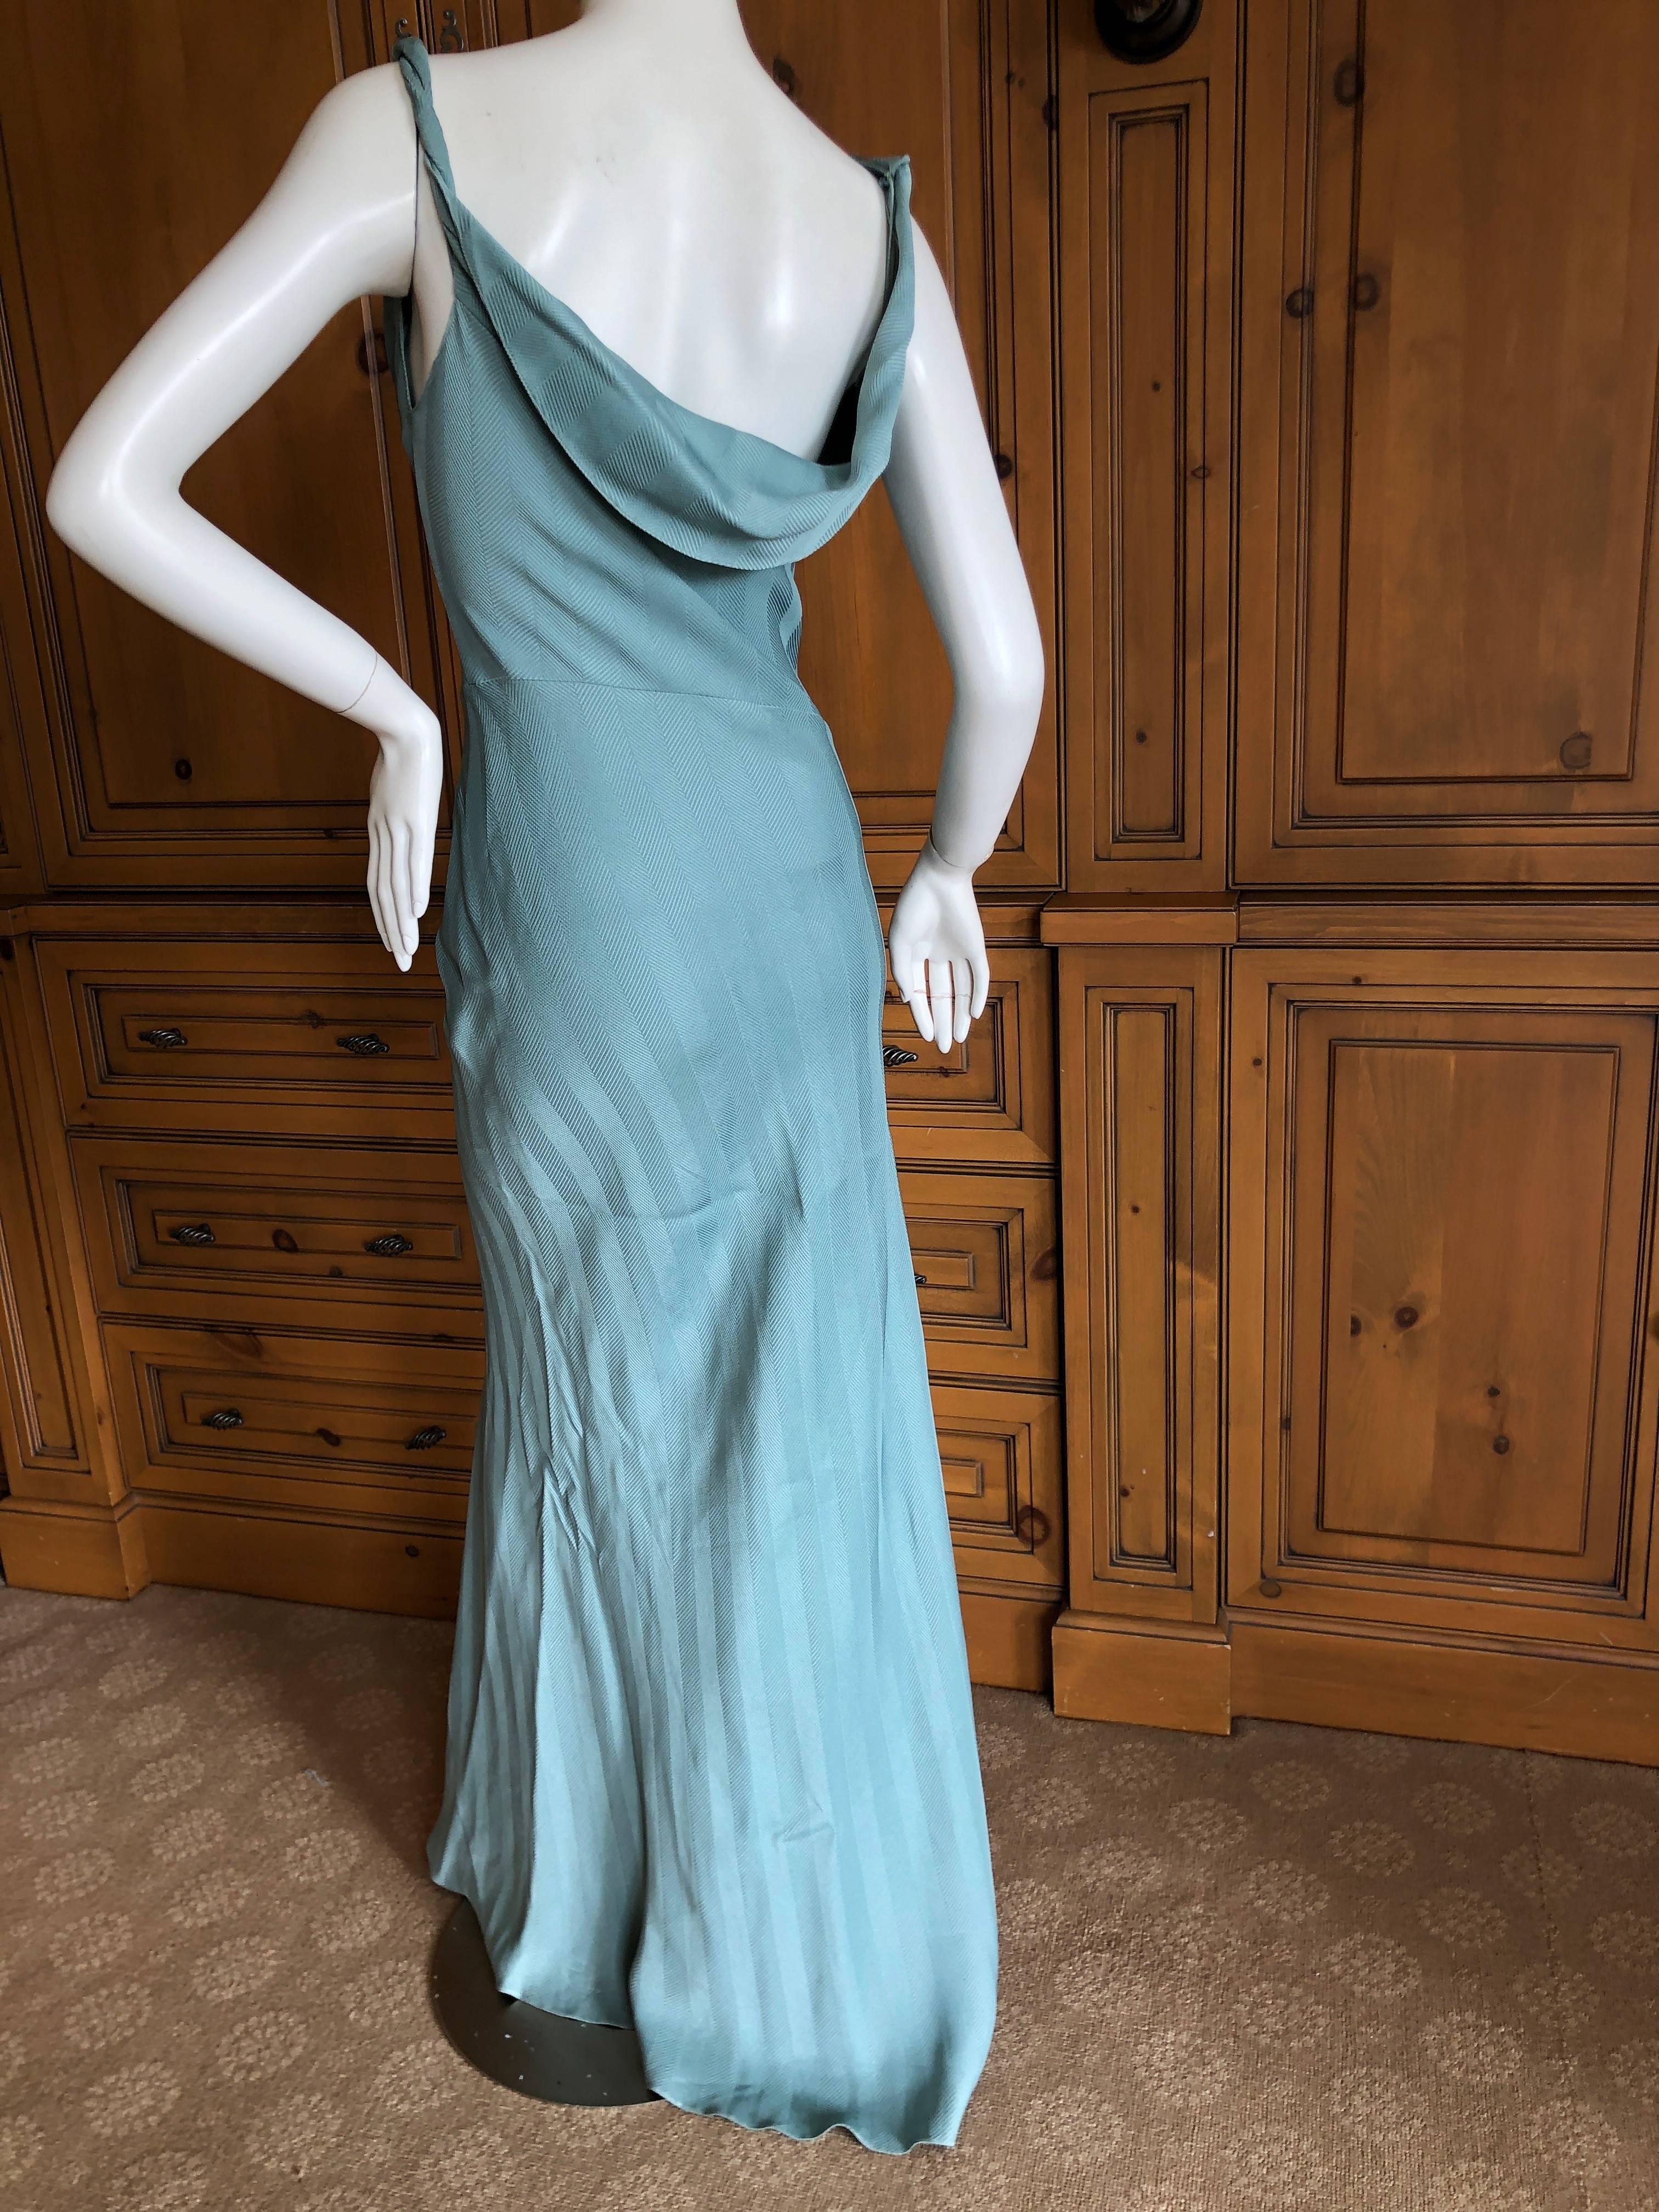 Women's John Galliano Vintage 90's Blue Twill Bias Cut Evening Dress with Knot Detail For Sale